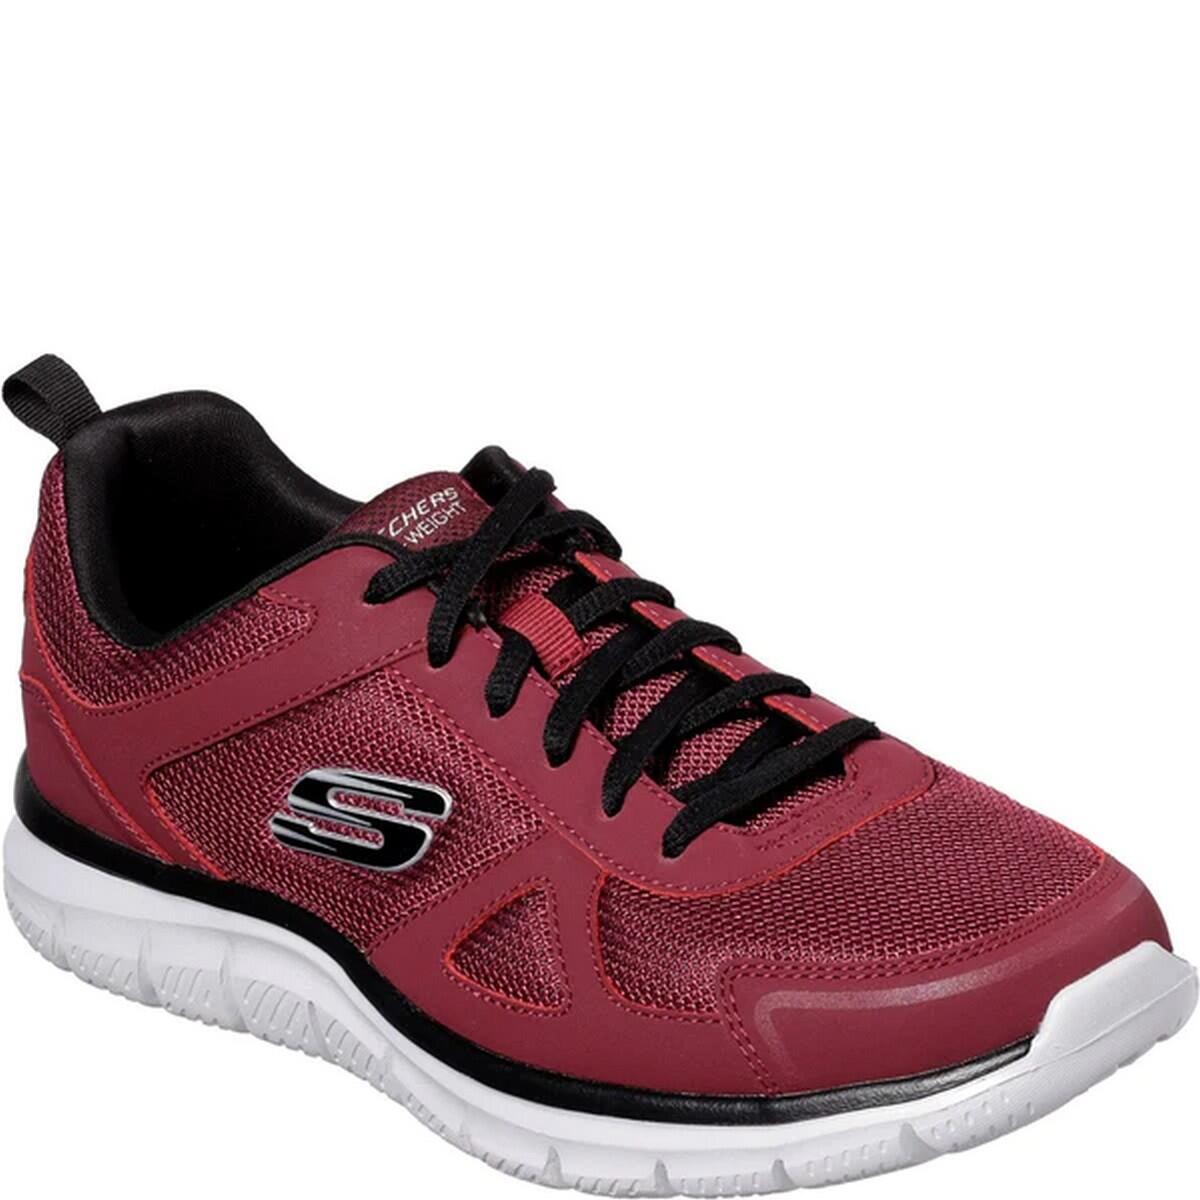 SKECHERS Mens Track Scloric Leather Trainers (Burgundy/Black)